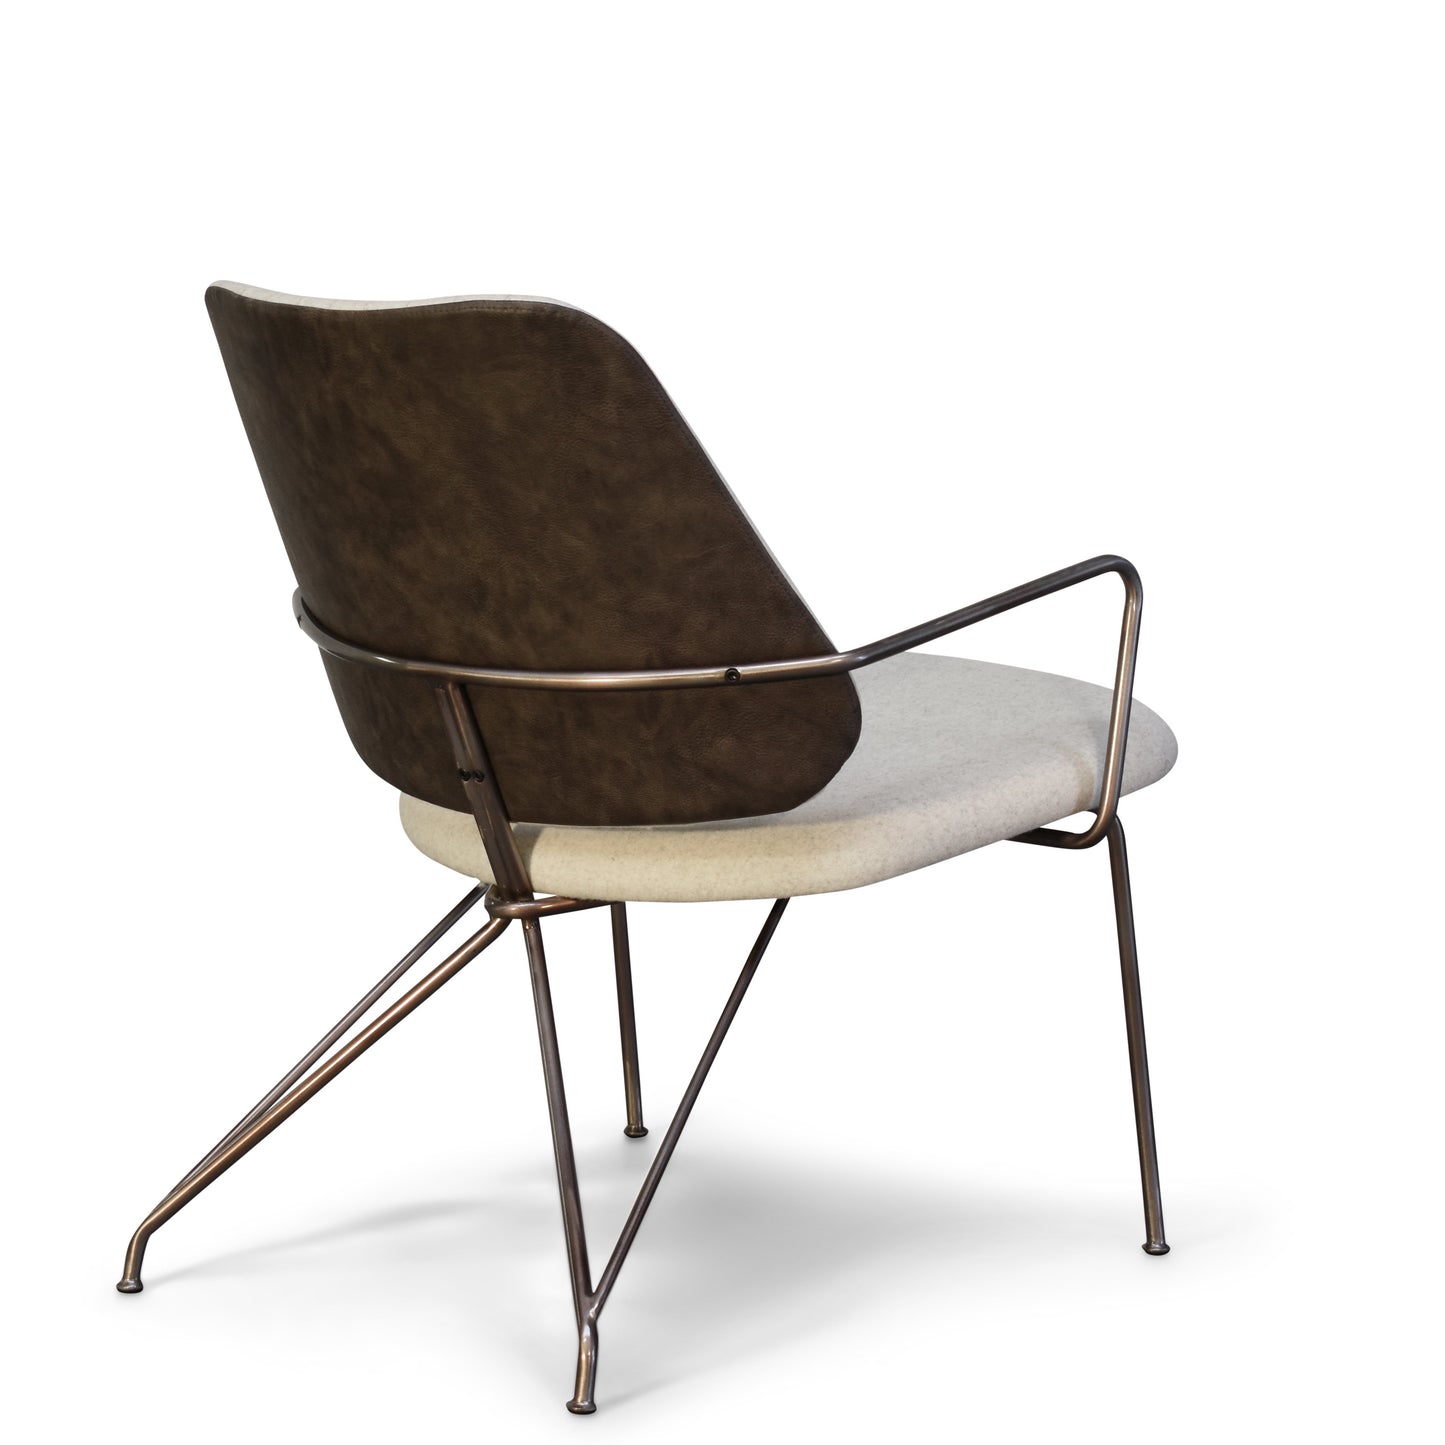 Taylor Contemporary Lounge Chair  Gingko Furniture     Four Hands, Burke Decor, Mid Century Modern Furniture, Old Bones Furniture Company, Old Bones Co, Modern Mid Century, Designer Furniture, https://www.oldbonesco.com/